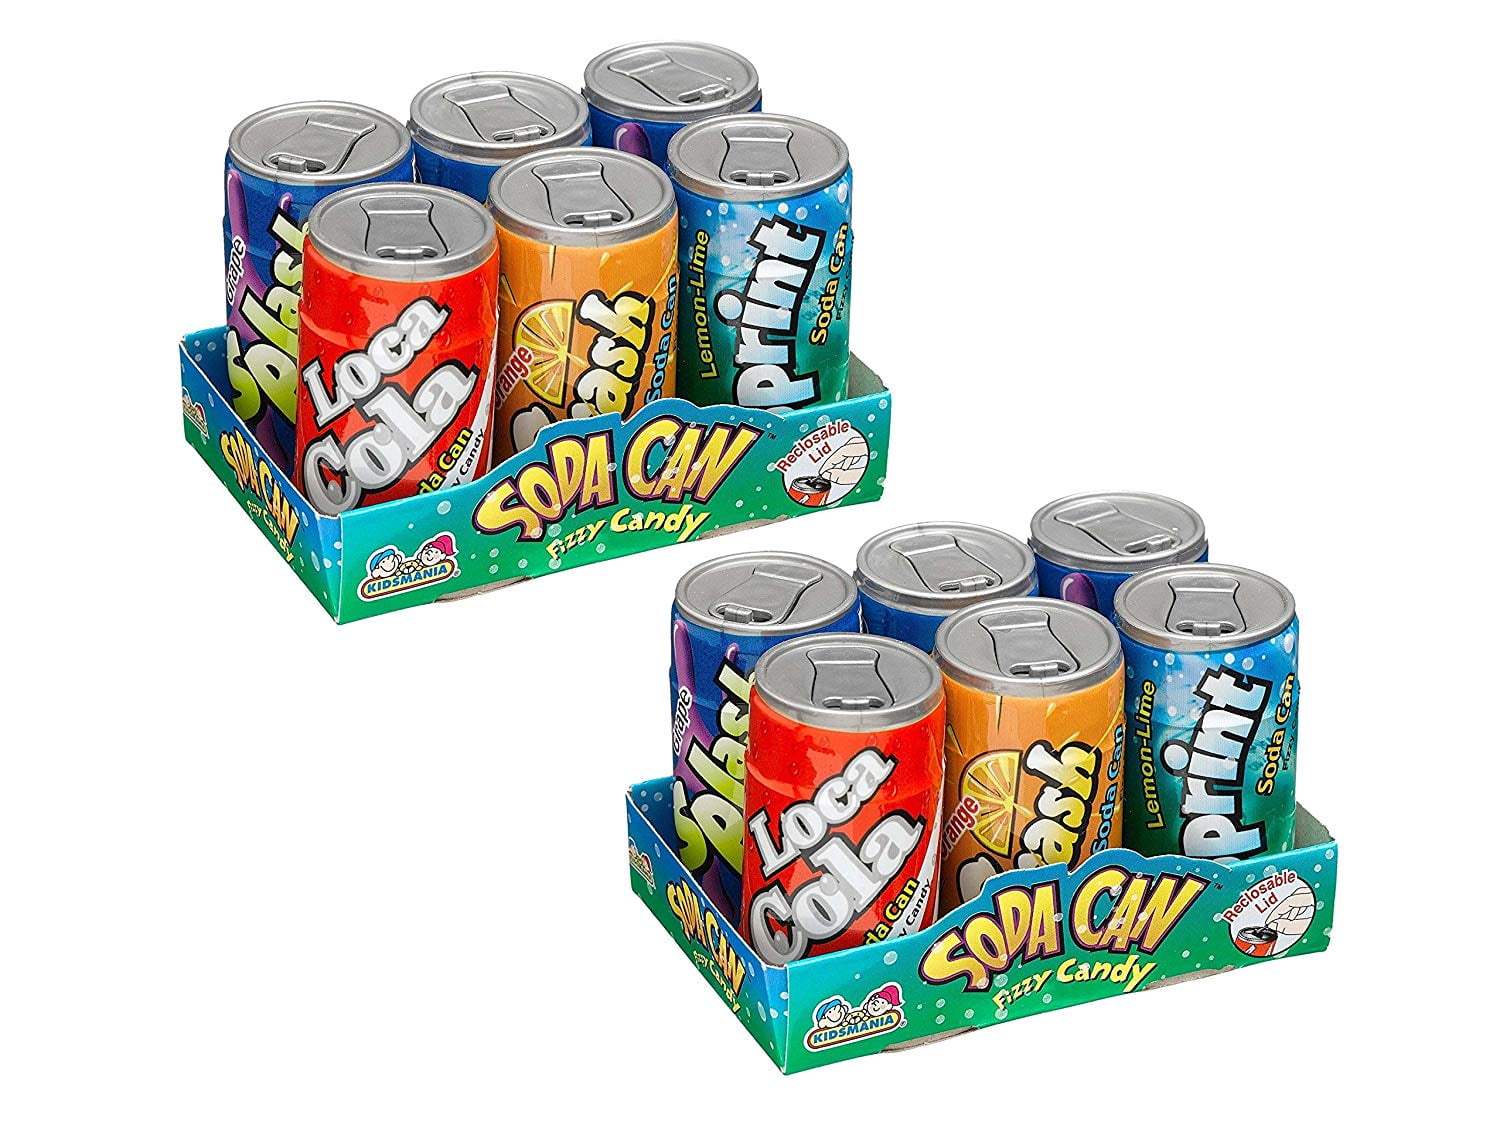  Mini  Soda  Can  Fizzy Candy 25oz 4 Assorted Flavors 12 